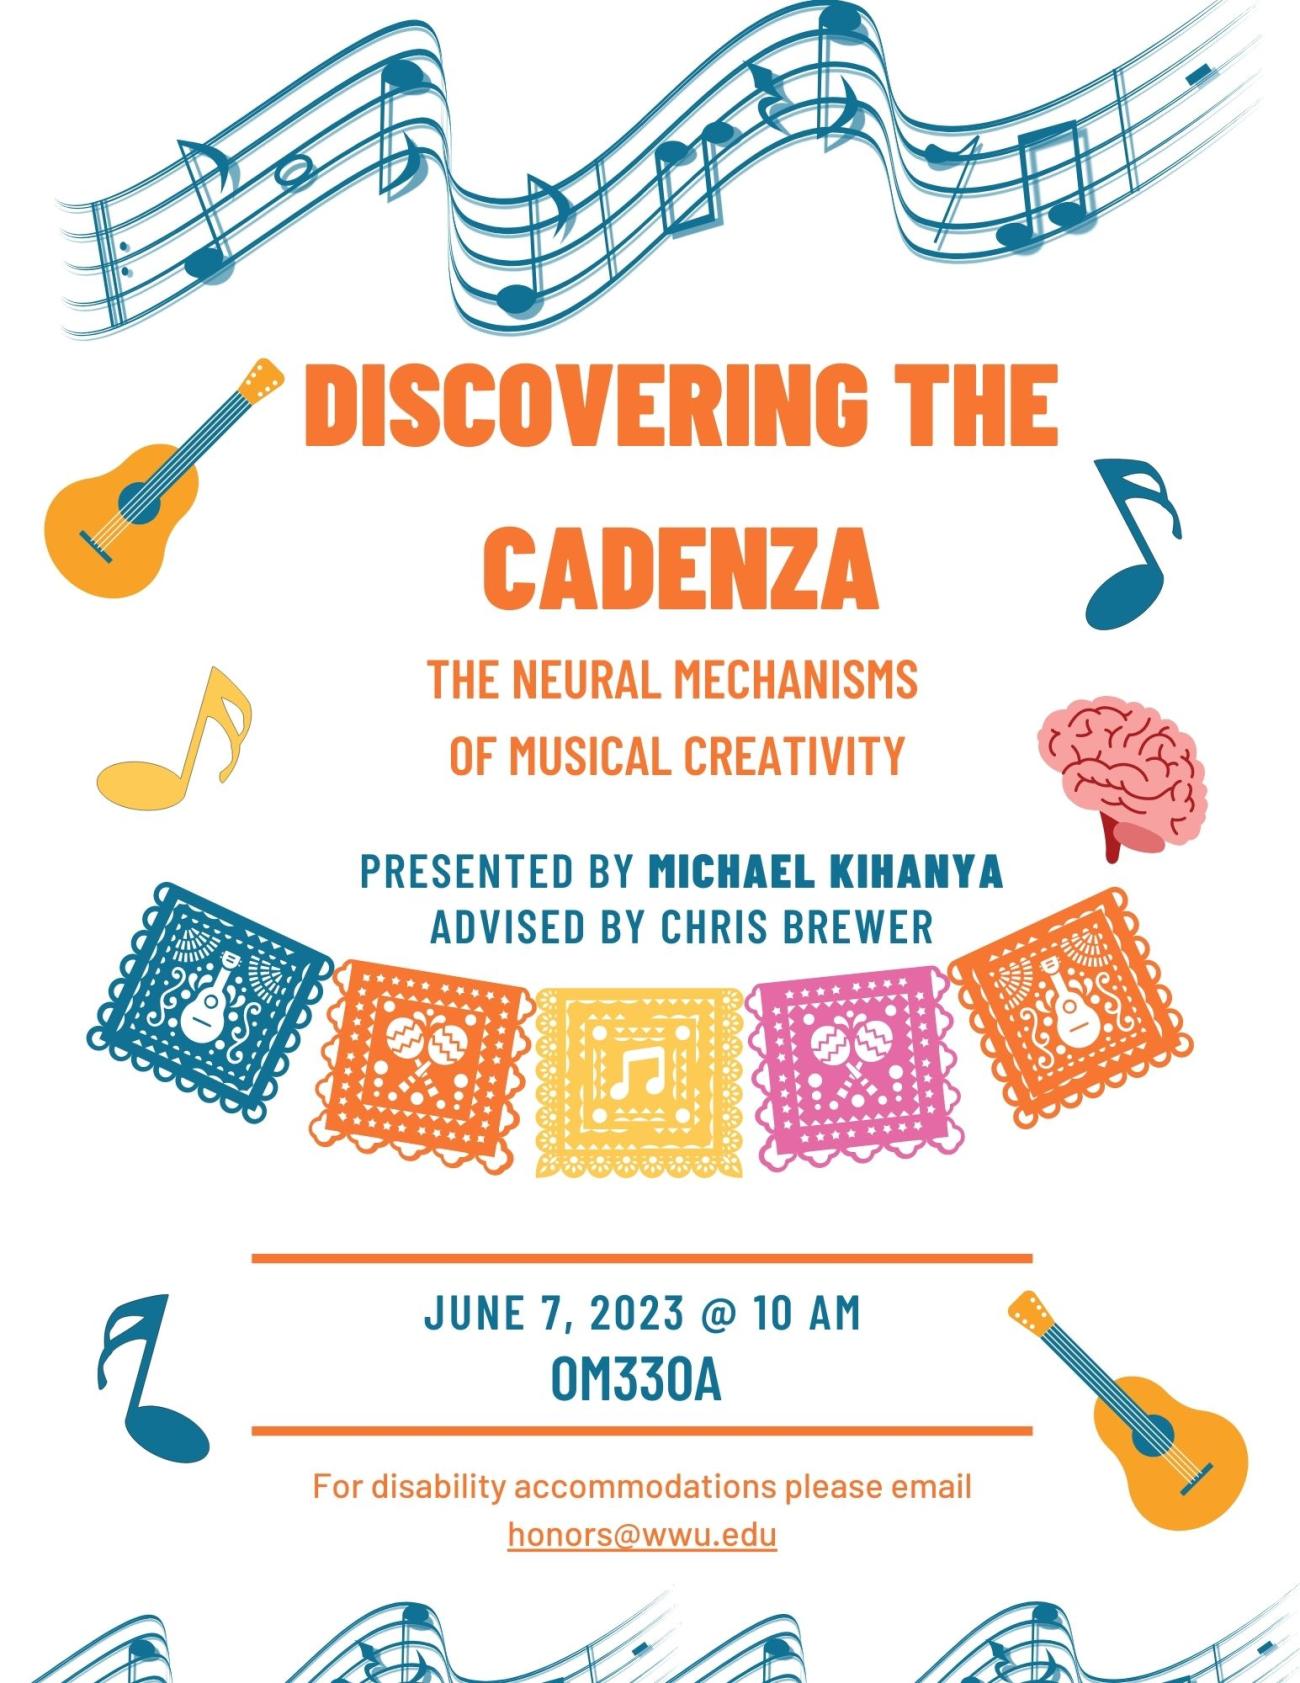 A white poster with orange text. A curving musical score goes across the top and bottom. The text reads “Discovering the Cadenza: The Neural Mechanisms of Musical Creativity. Presented by Michael Kihanya. Advised by Chris Brewer. June 7, 2023 @ 10 AM. OM330A. For disability accommodations please email honors@wwu.edu.”